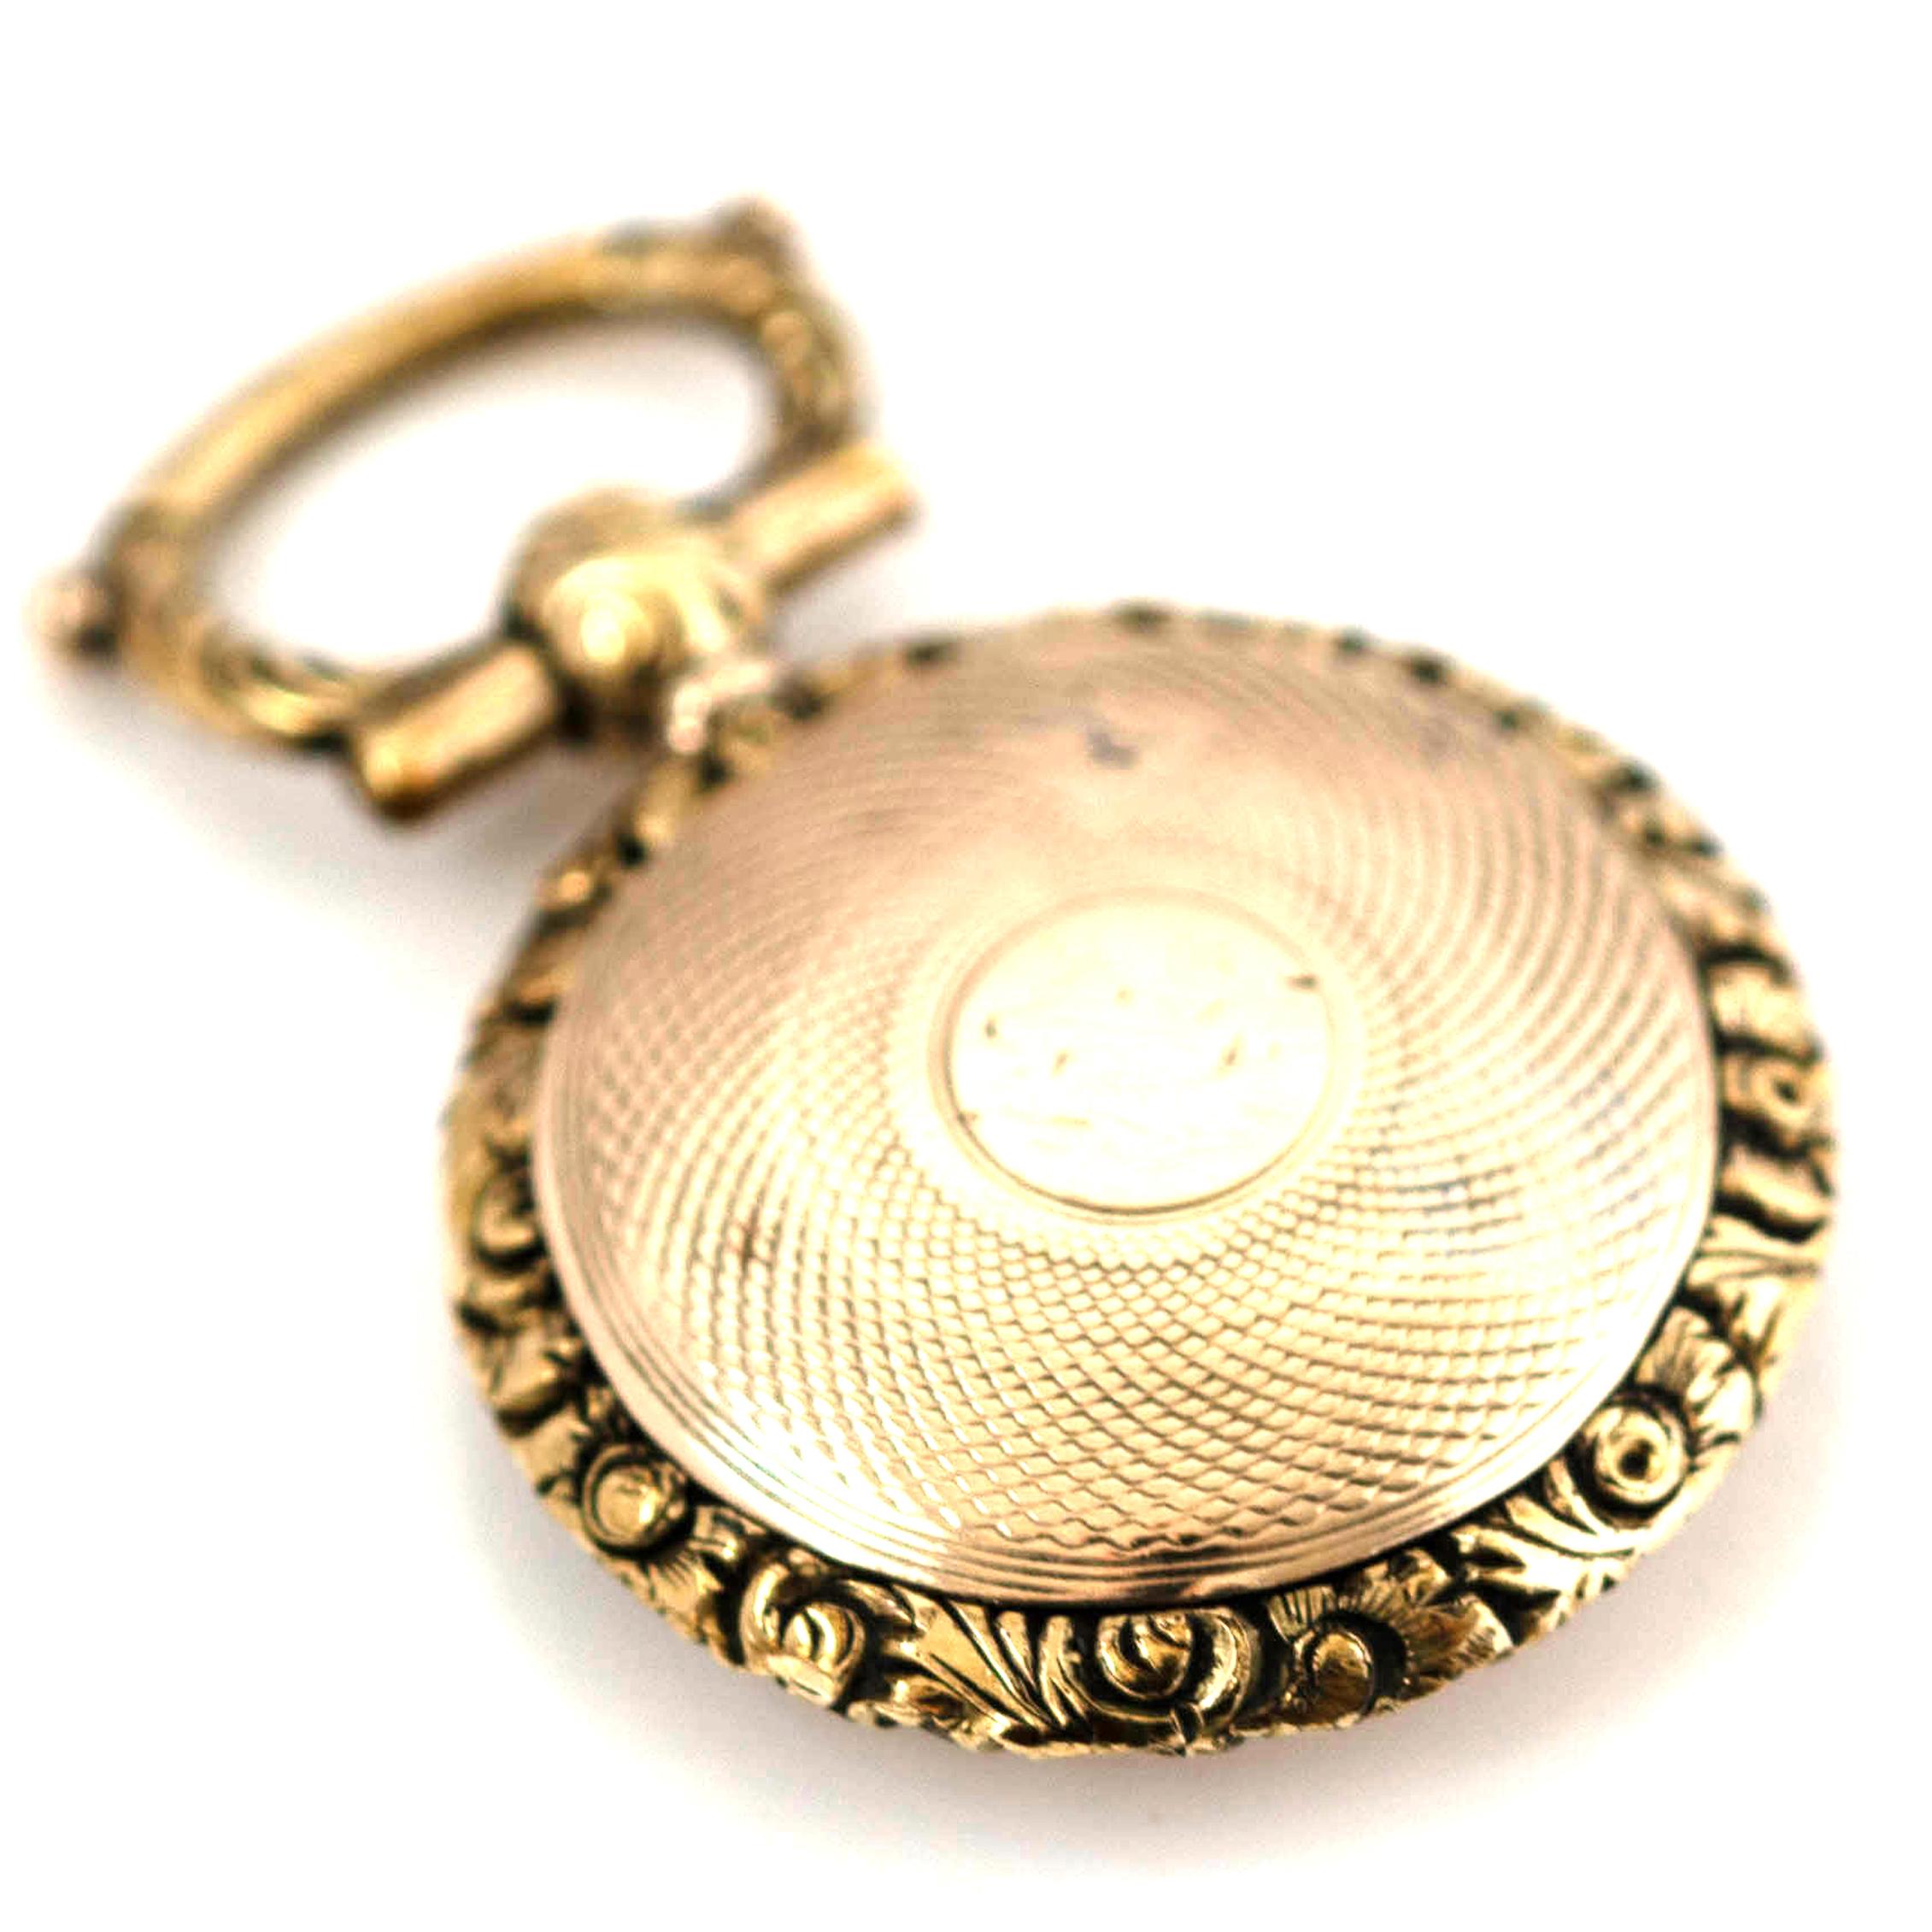 Step back into the deep sentimentality of the Victorian era with this poignant 9ct gold mourning locket. Masterfully crafted with an engine-turned technique, the intricate patterns on its surface reflect the period's dedication to fine detail and